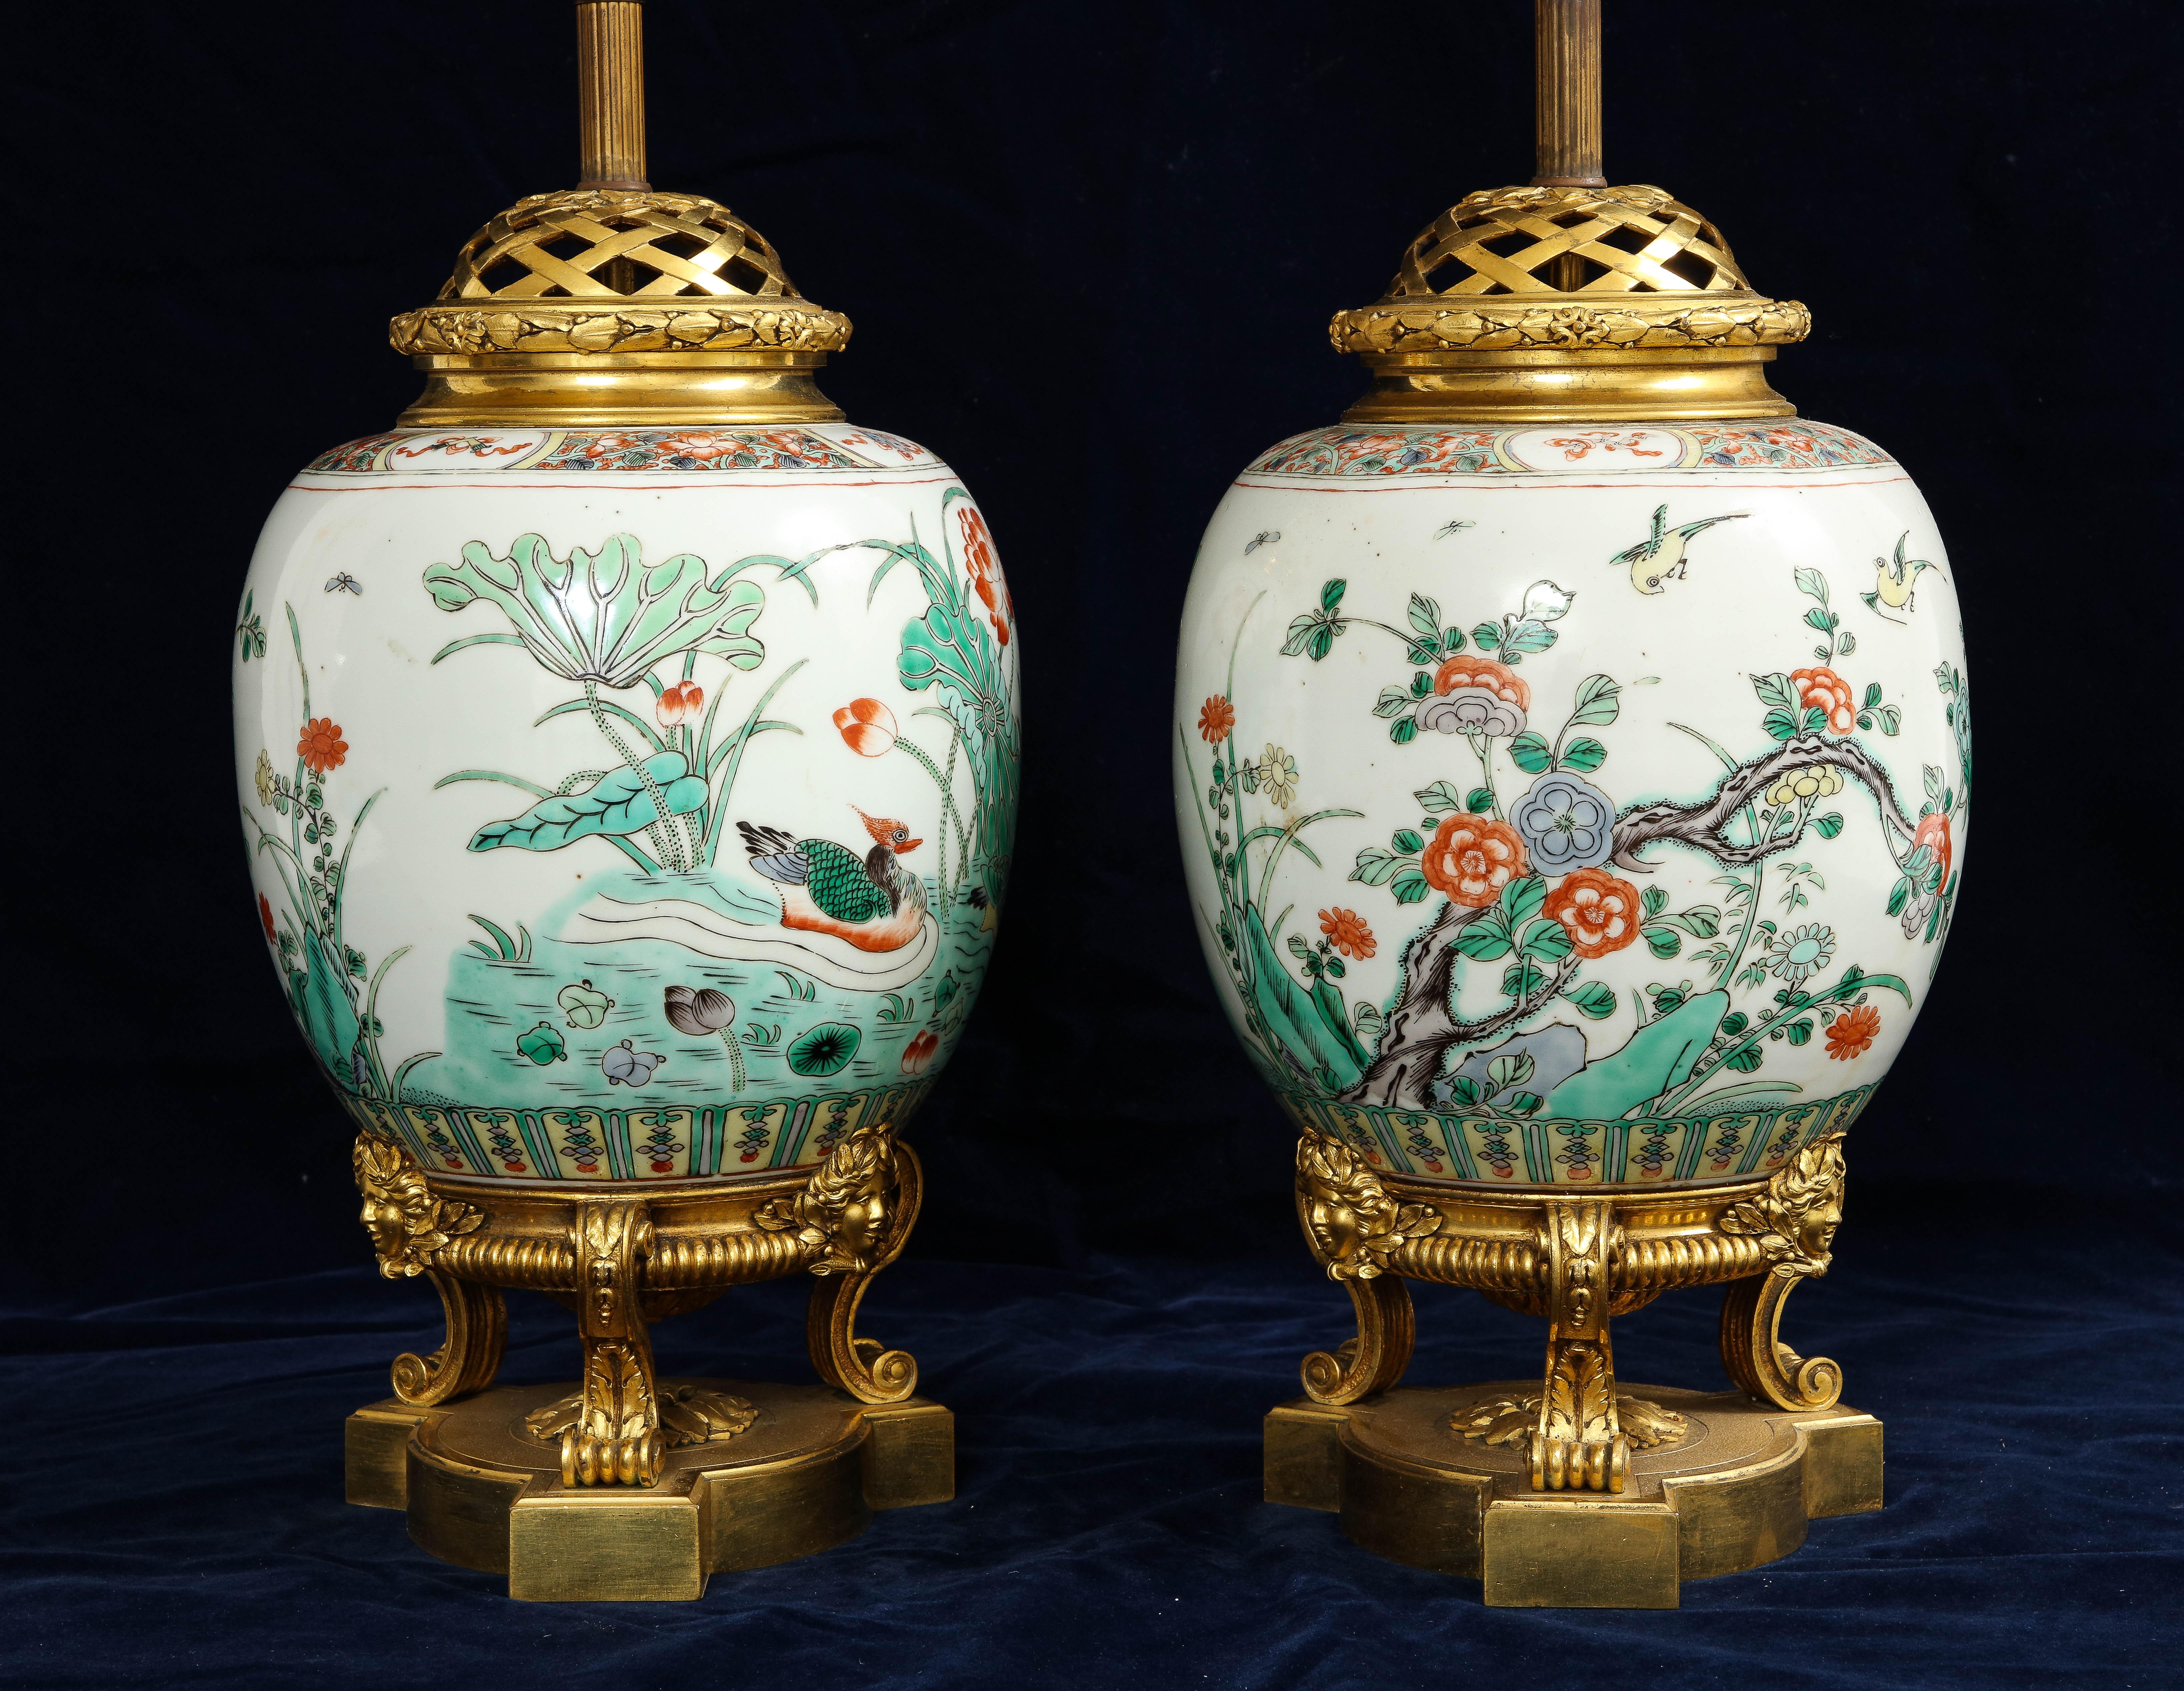 Louis XVI Pair 19th C Ormolu Mounted Chinese Famille Verte Porcelain Vases Turned to Lamps For Sale